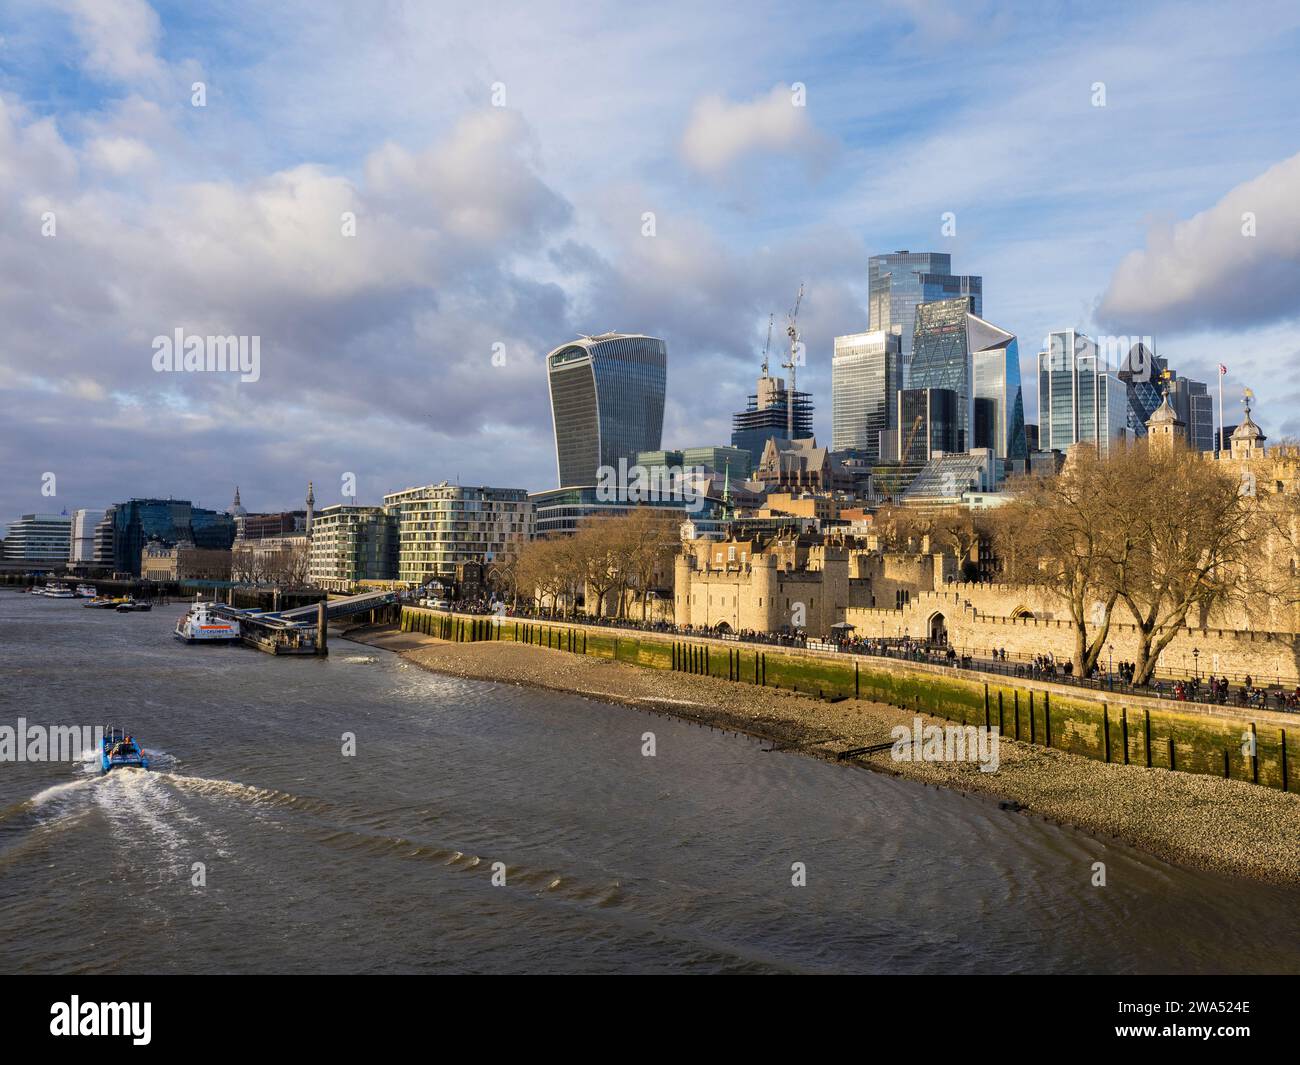 Boat Travelling on the River Thames, with the Tower of London and City of London, London, England, UK, GB. Stock Photo